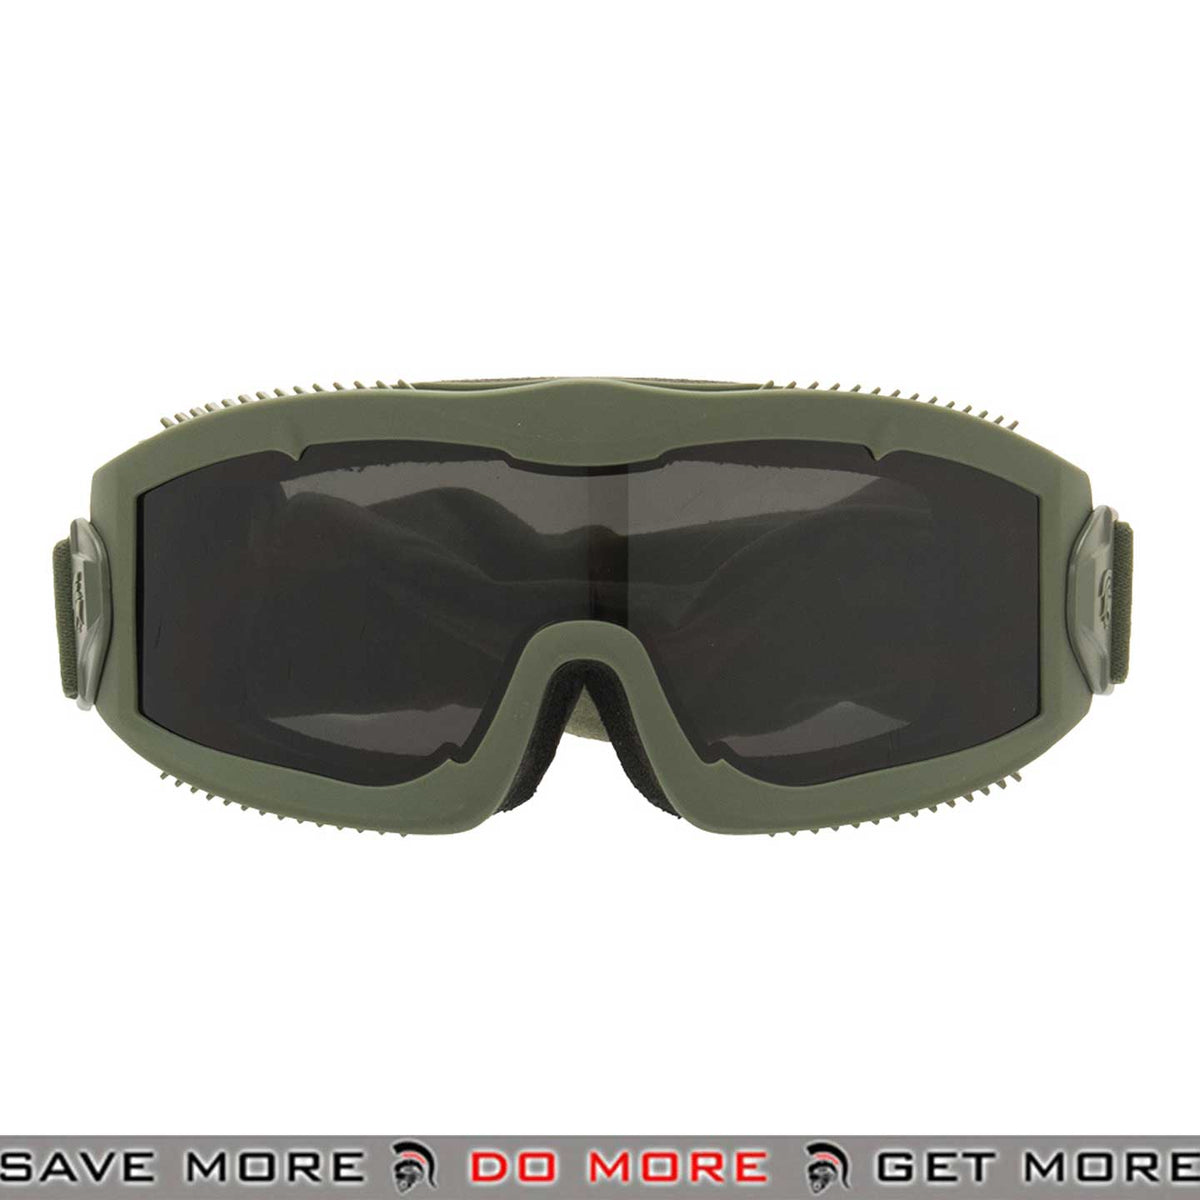 LT AERO ANSI z87.1 Rated Airsoft Safety Goggles - ModernAirsoft